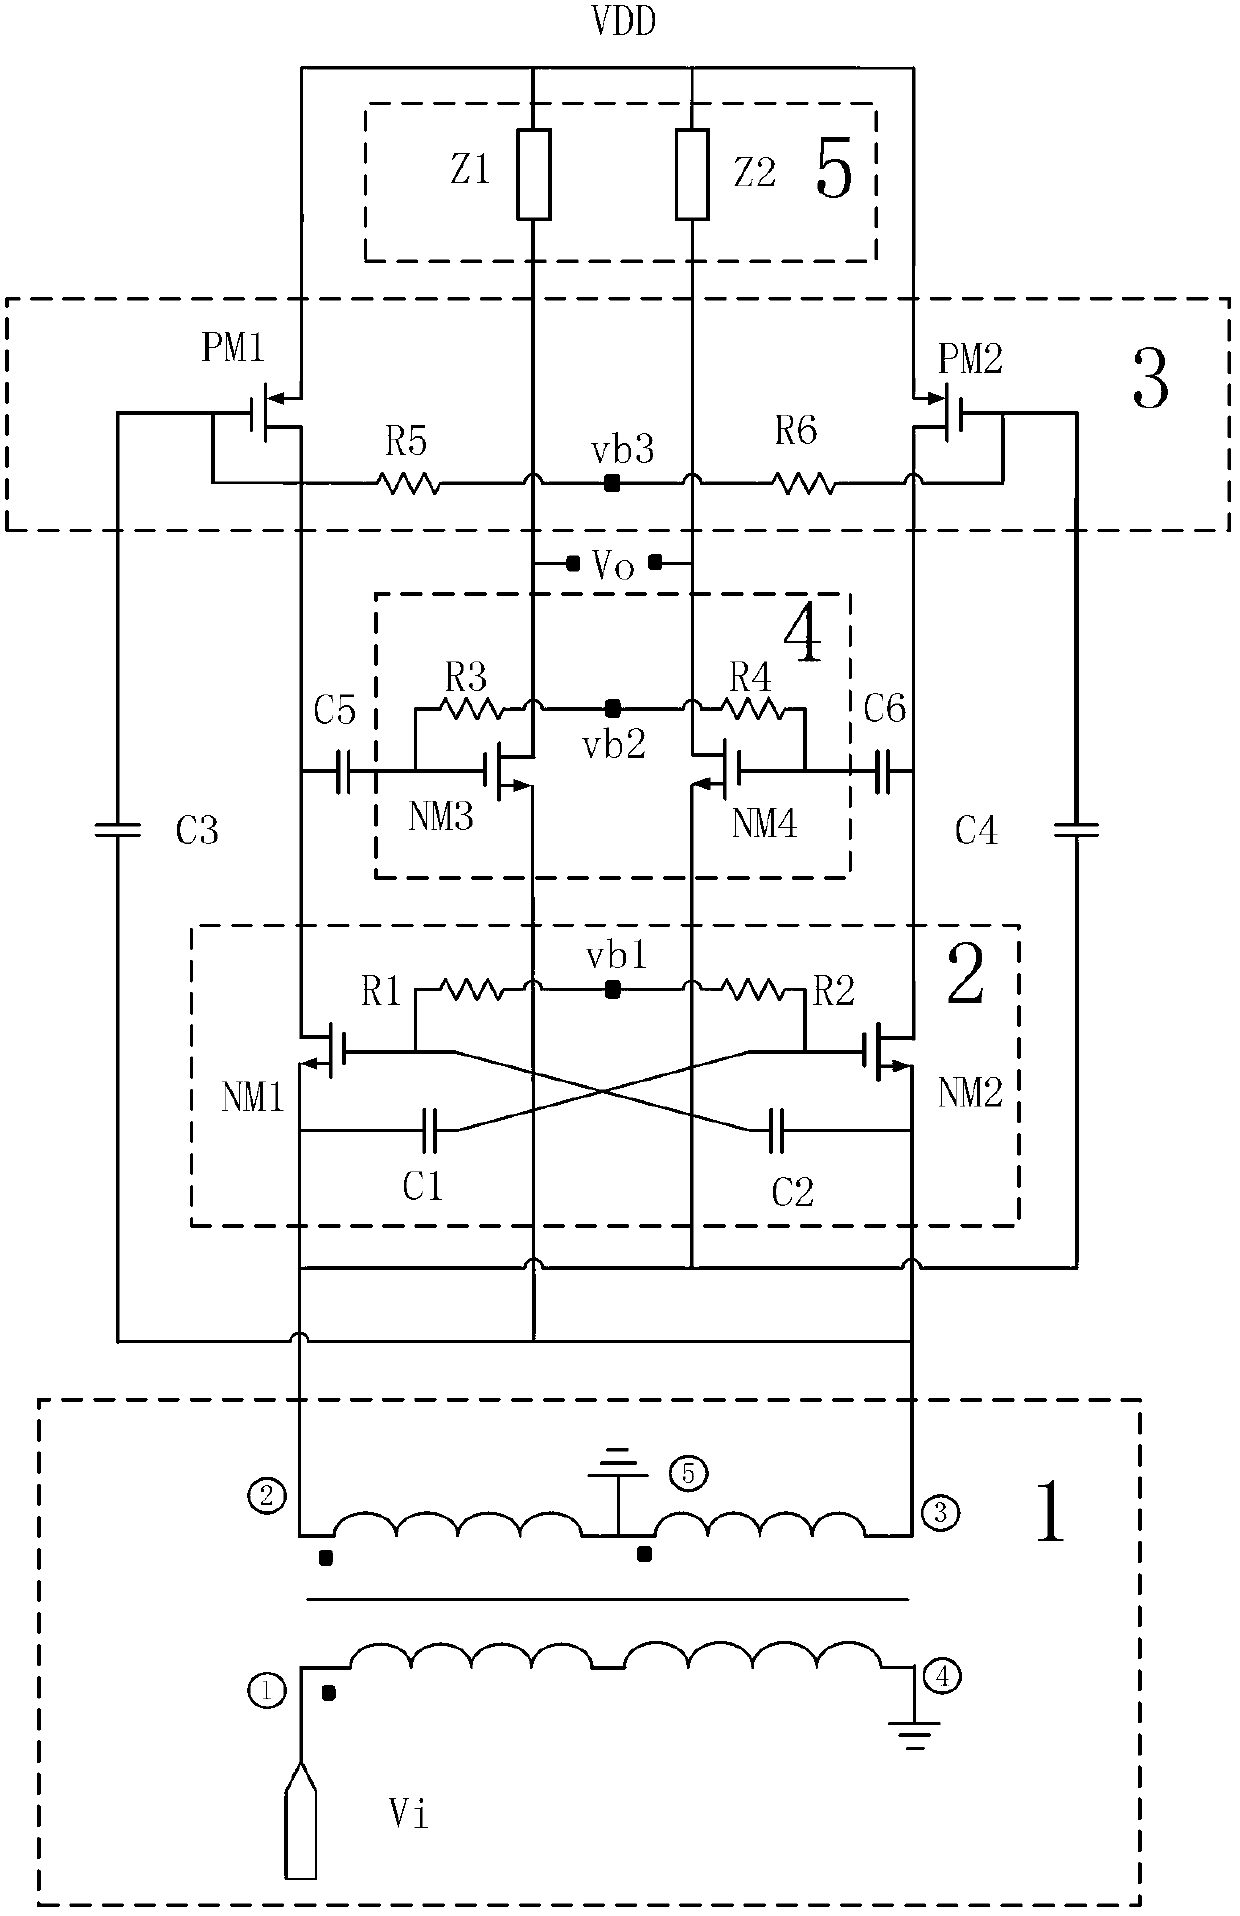 Low-power consumption and low-noise amplifier adopting noise cancellation technology